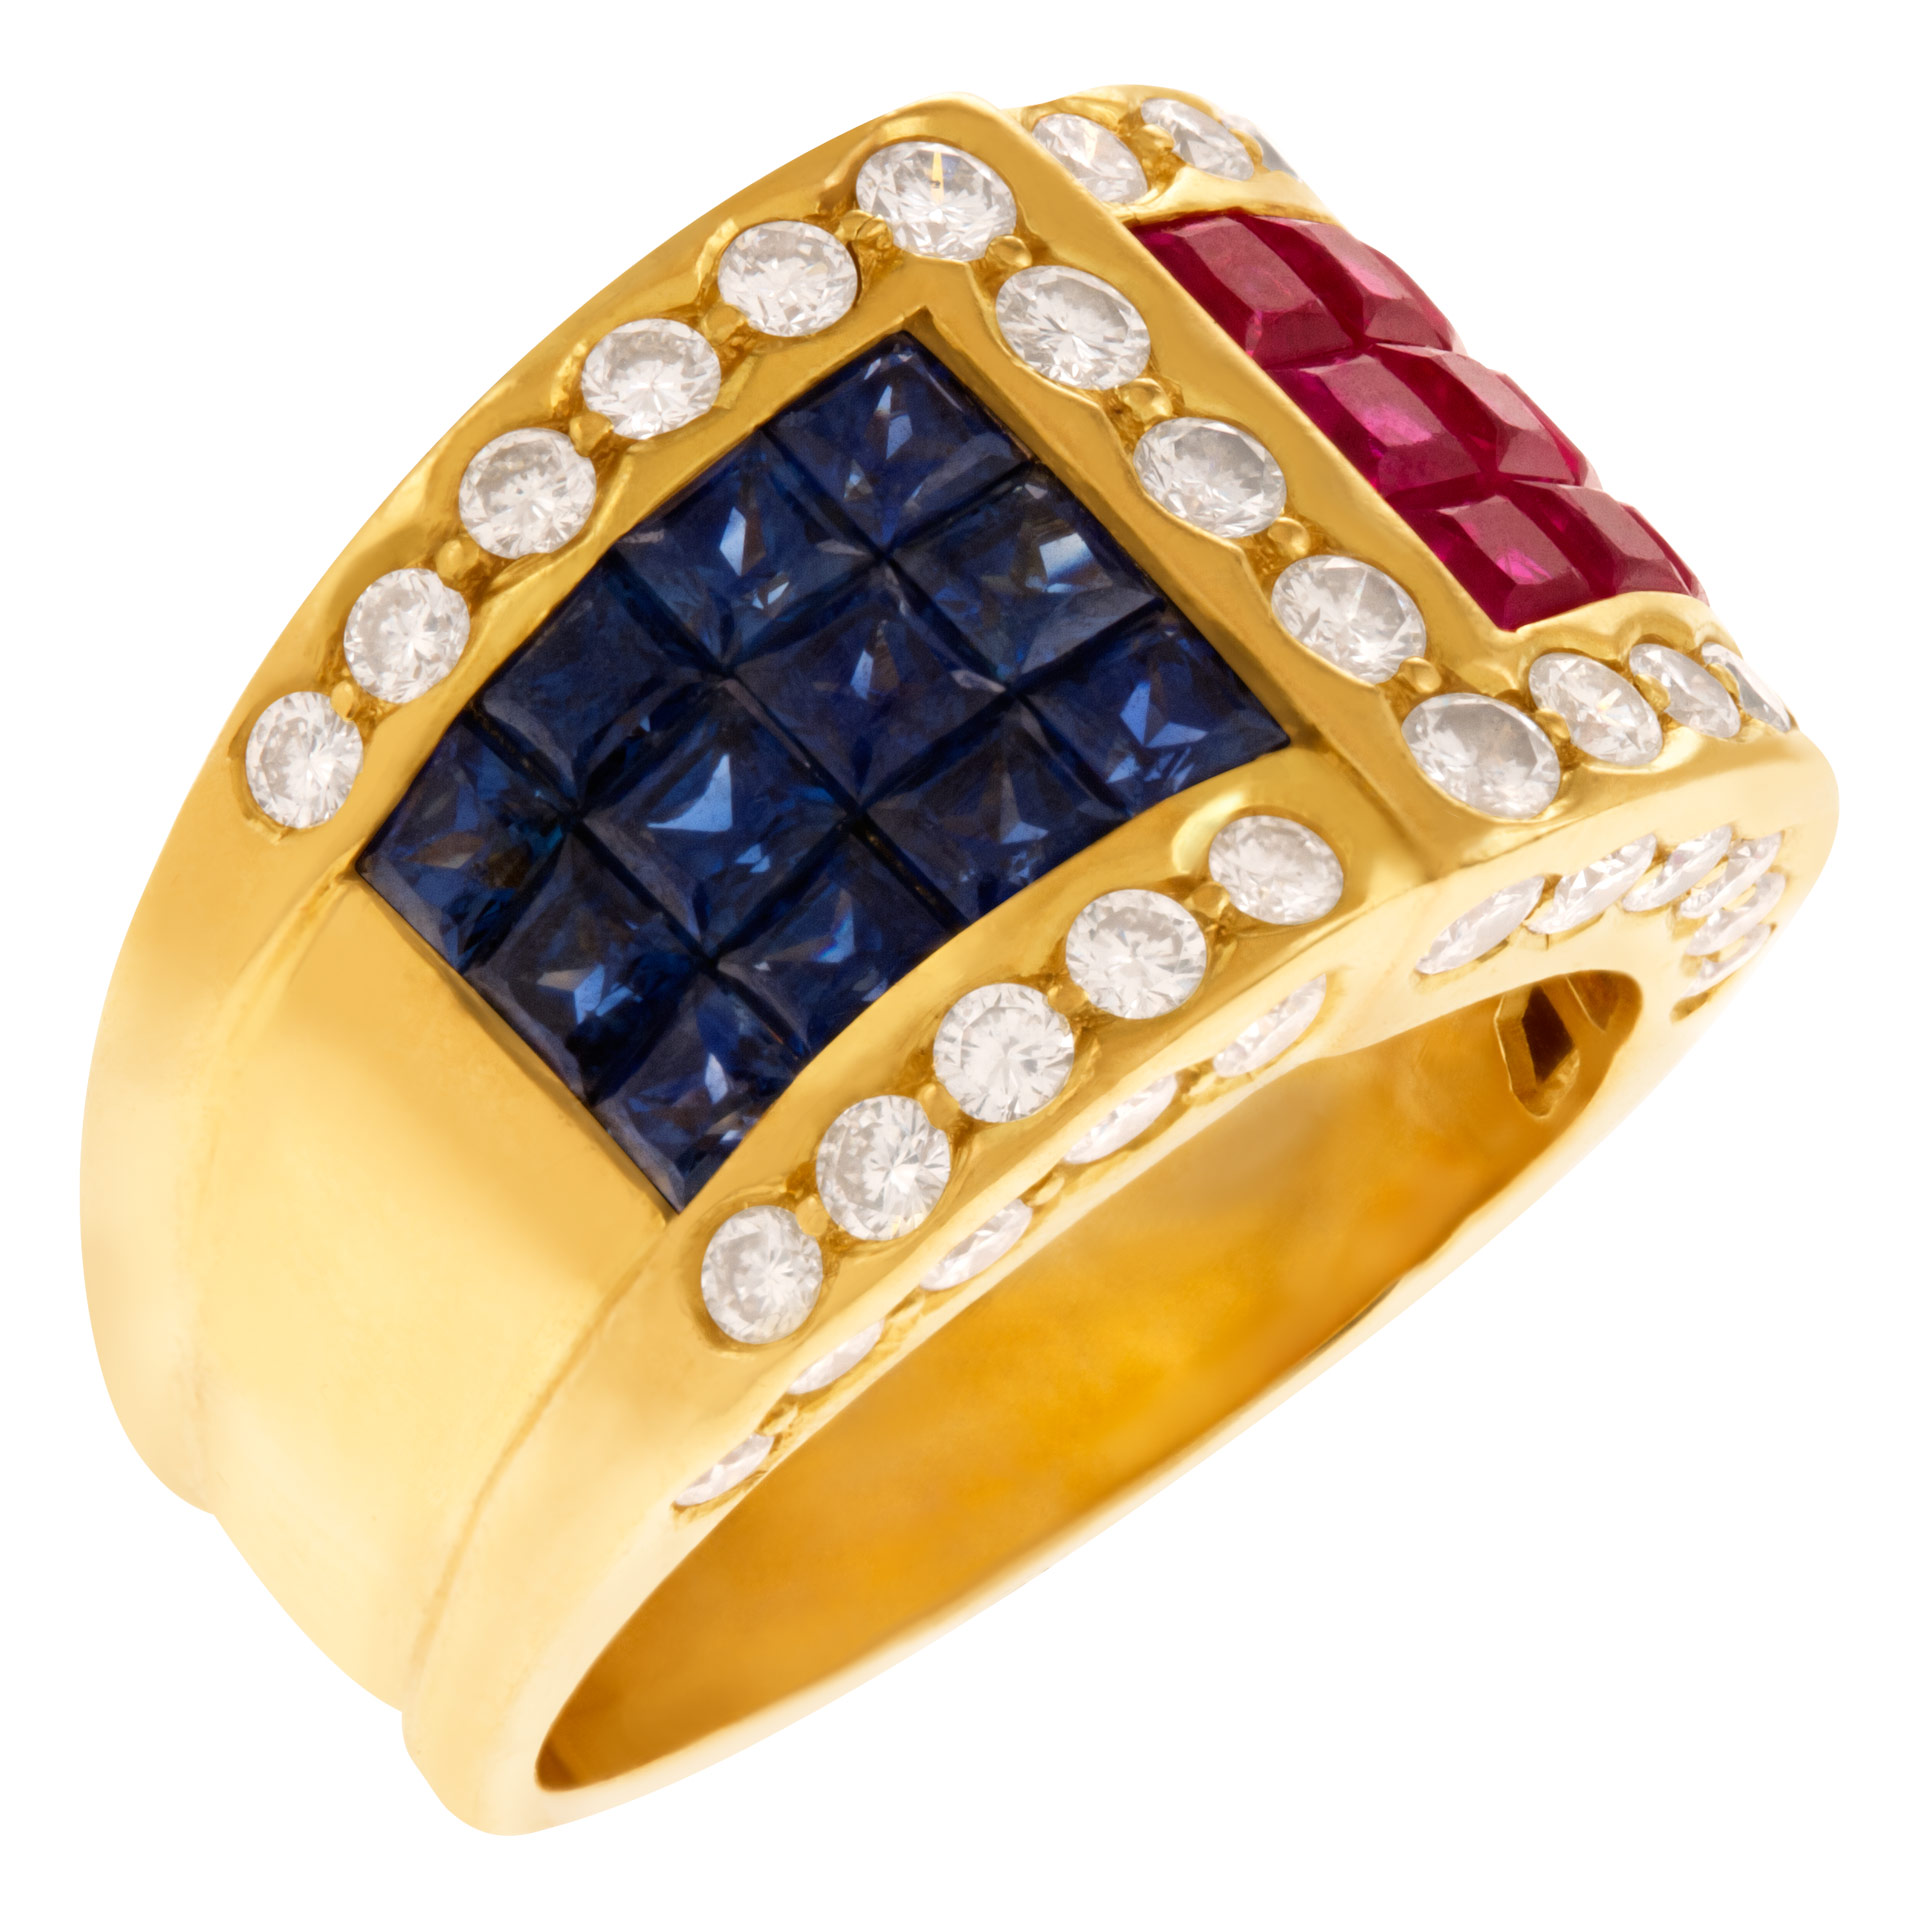 Sapphire, ruby & diamond ring in 18k yellow gold. image 3